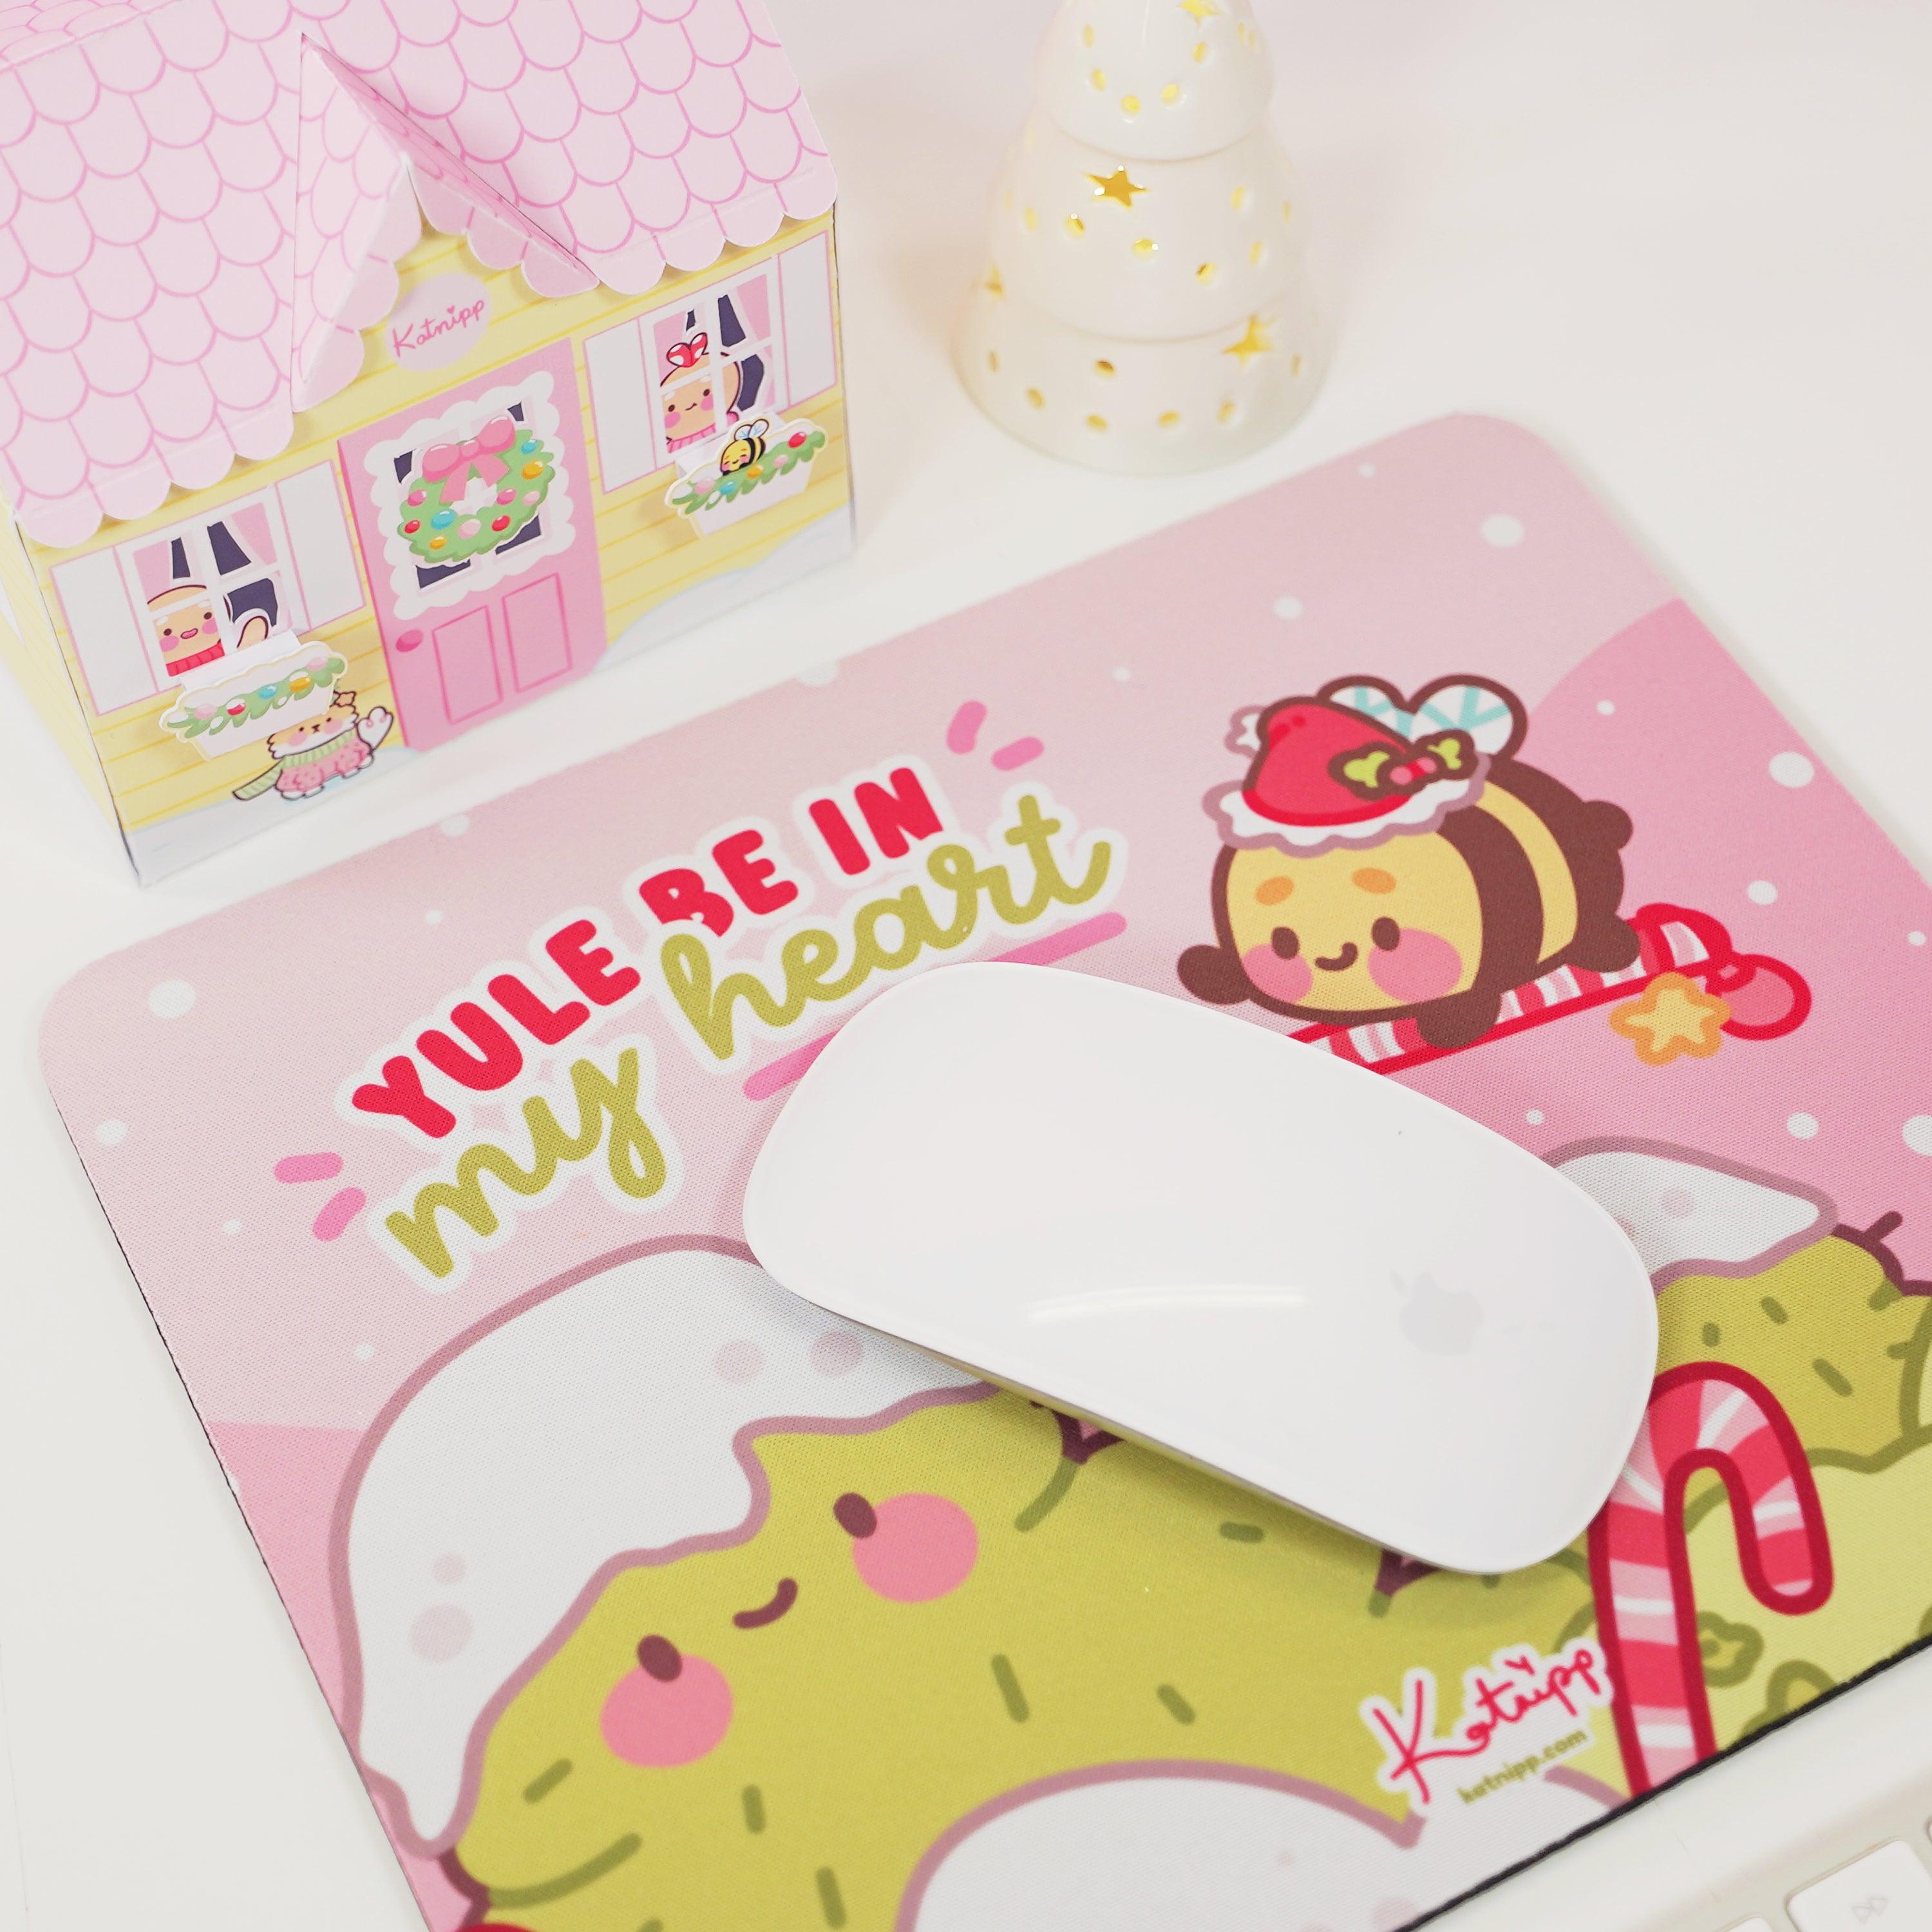 Image of Bumblebutt Candy Cane Kawaii Mouse Pad with festive design. 2